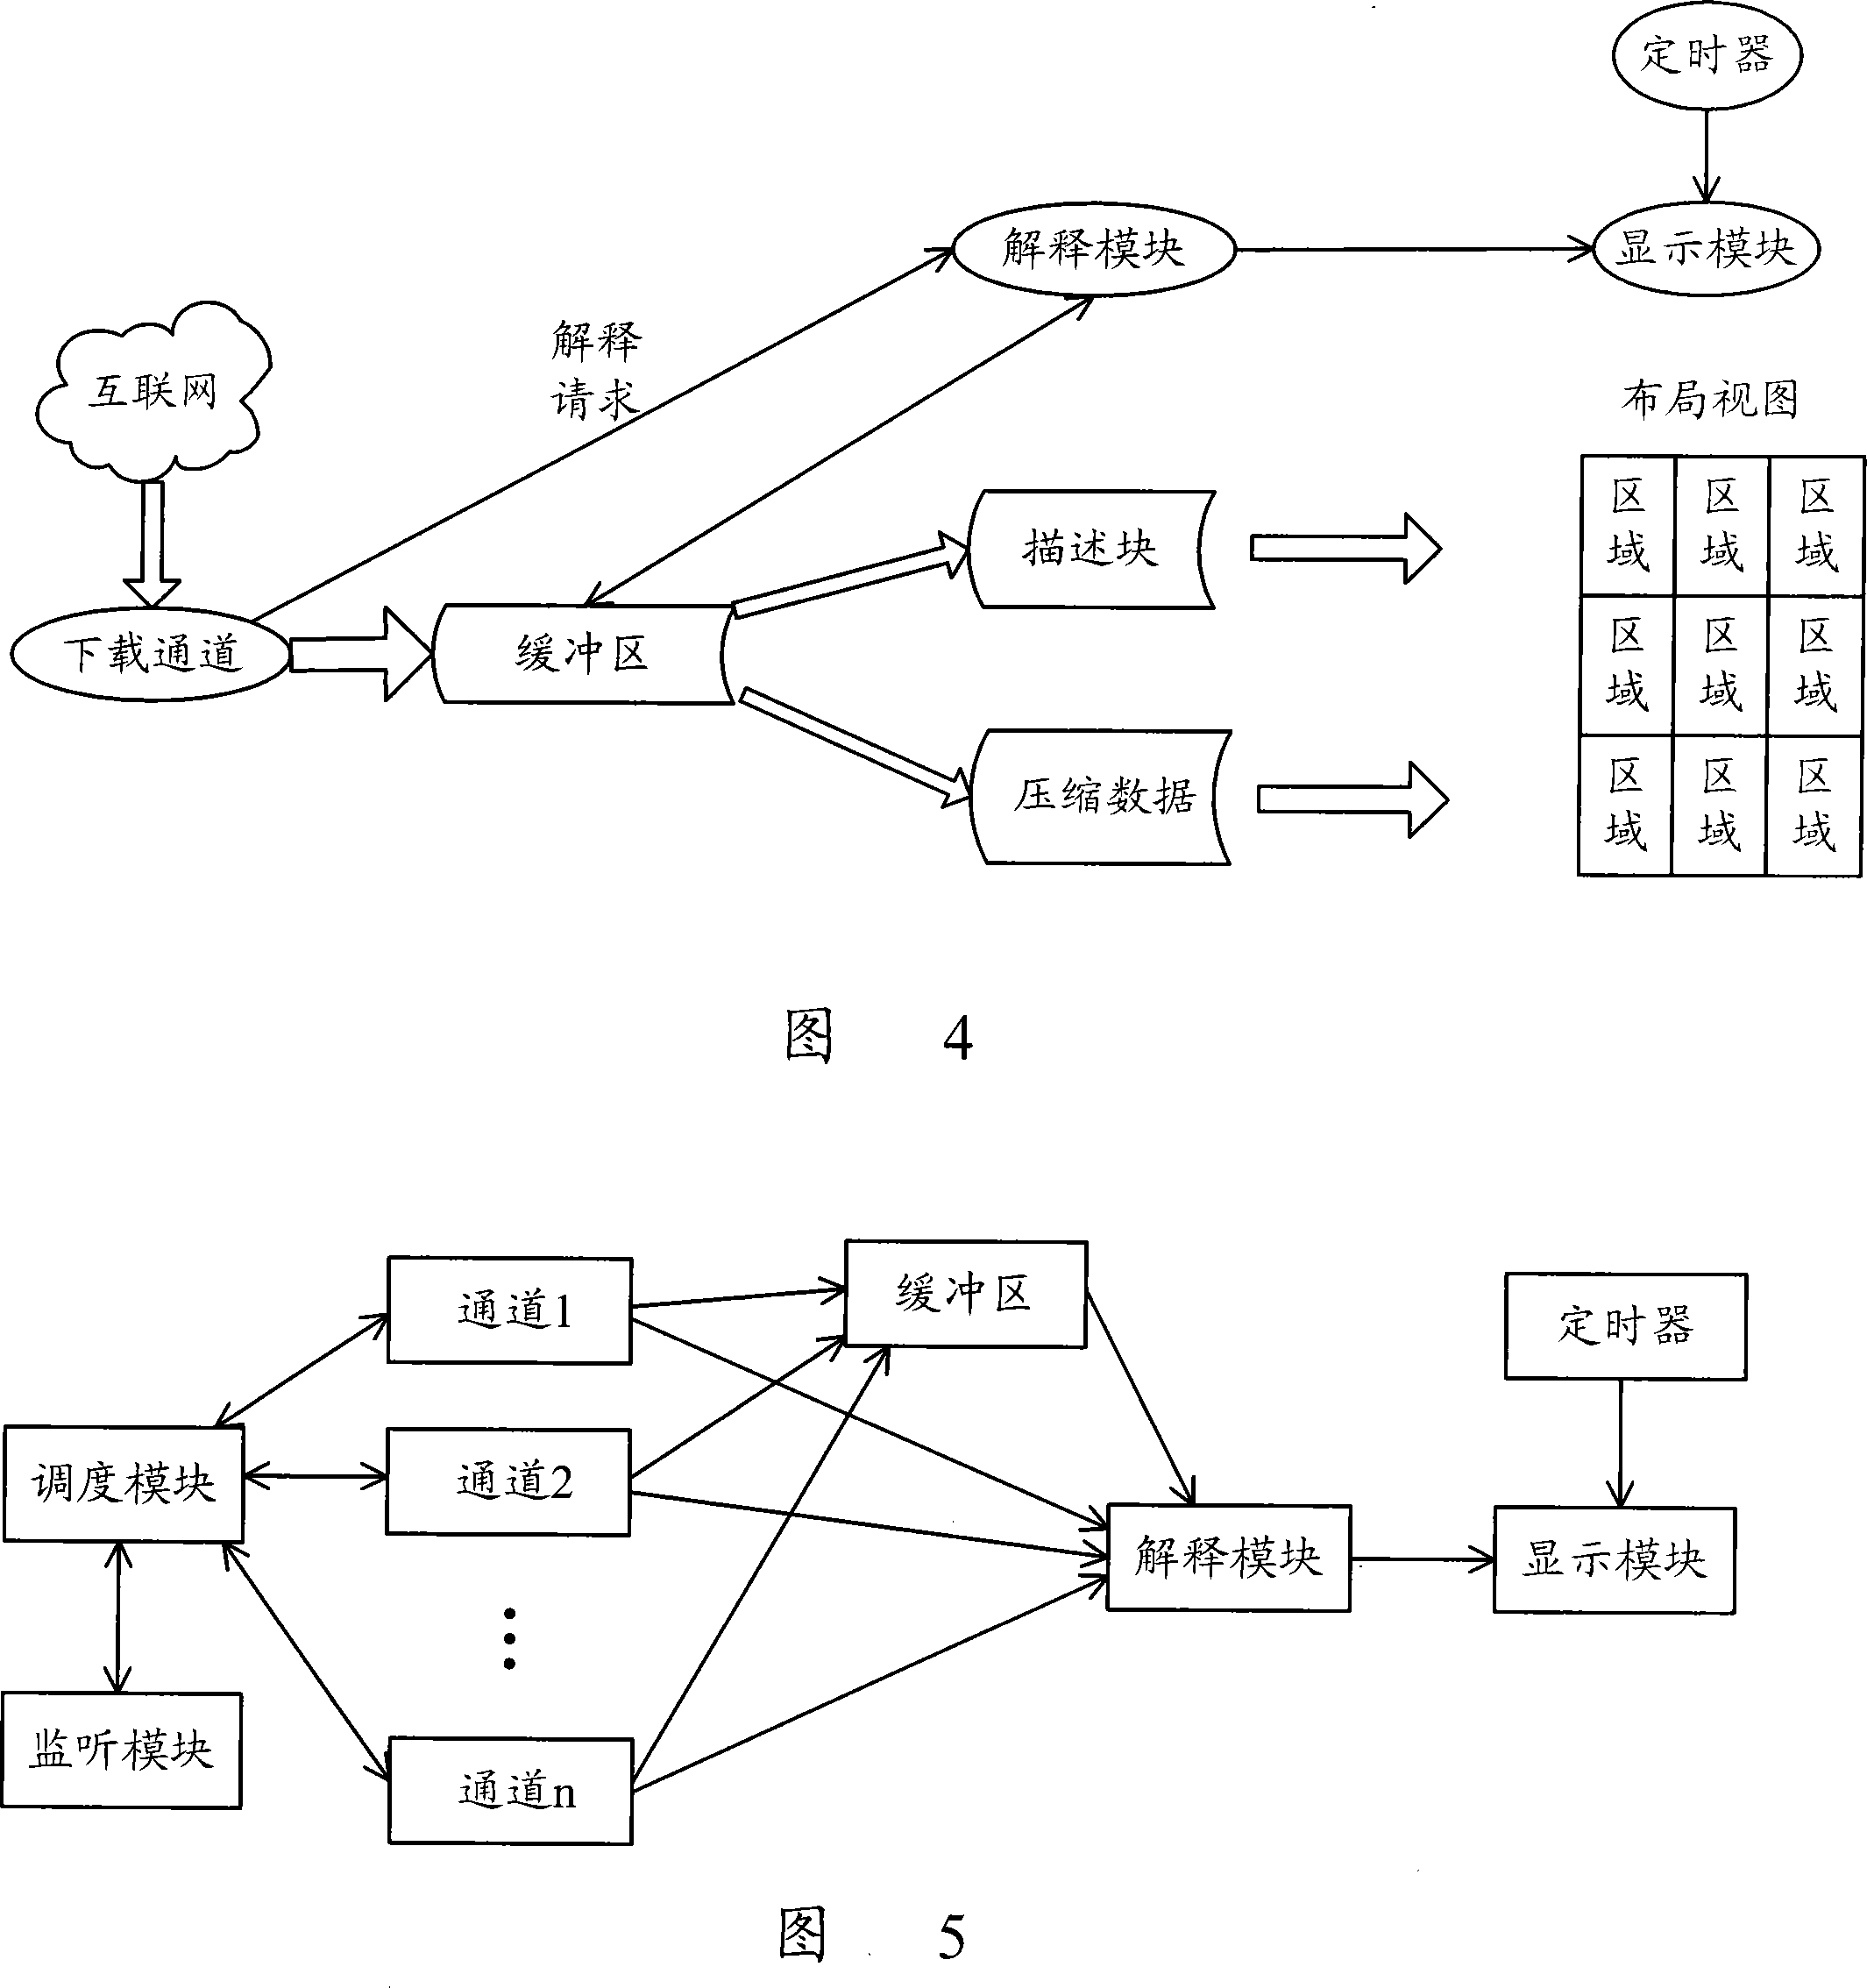 Method and device for optimizing user interactive performance of built-in browser